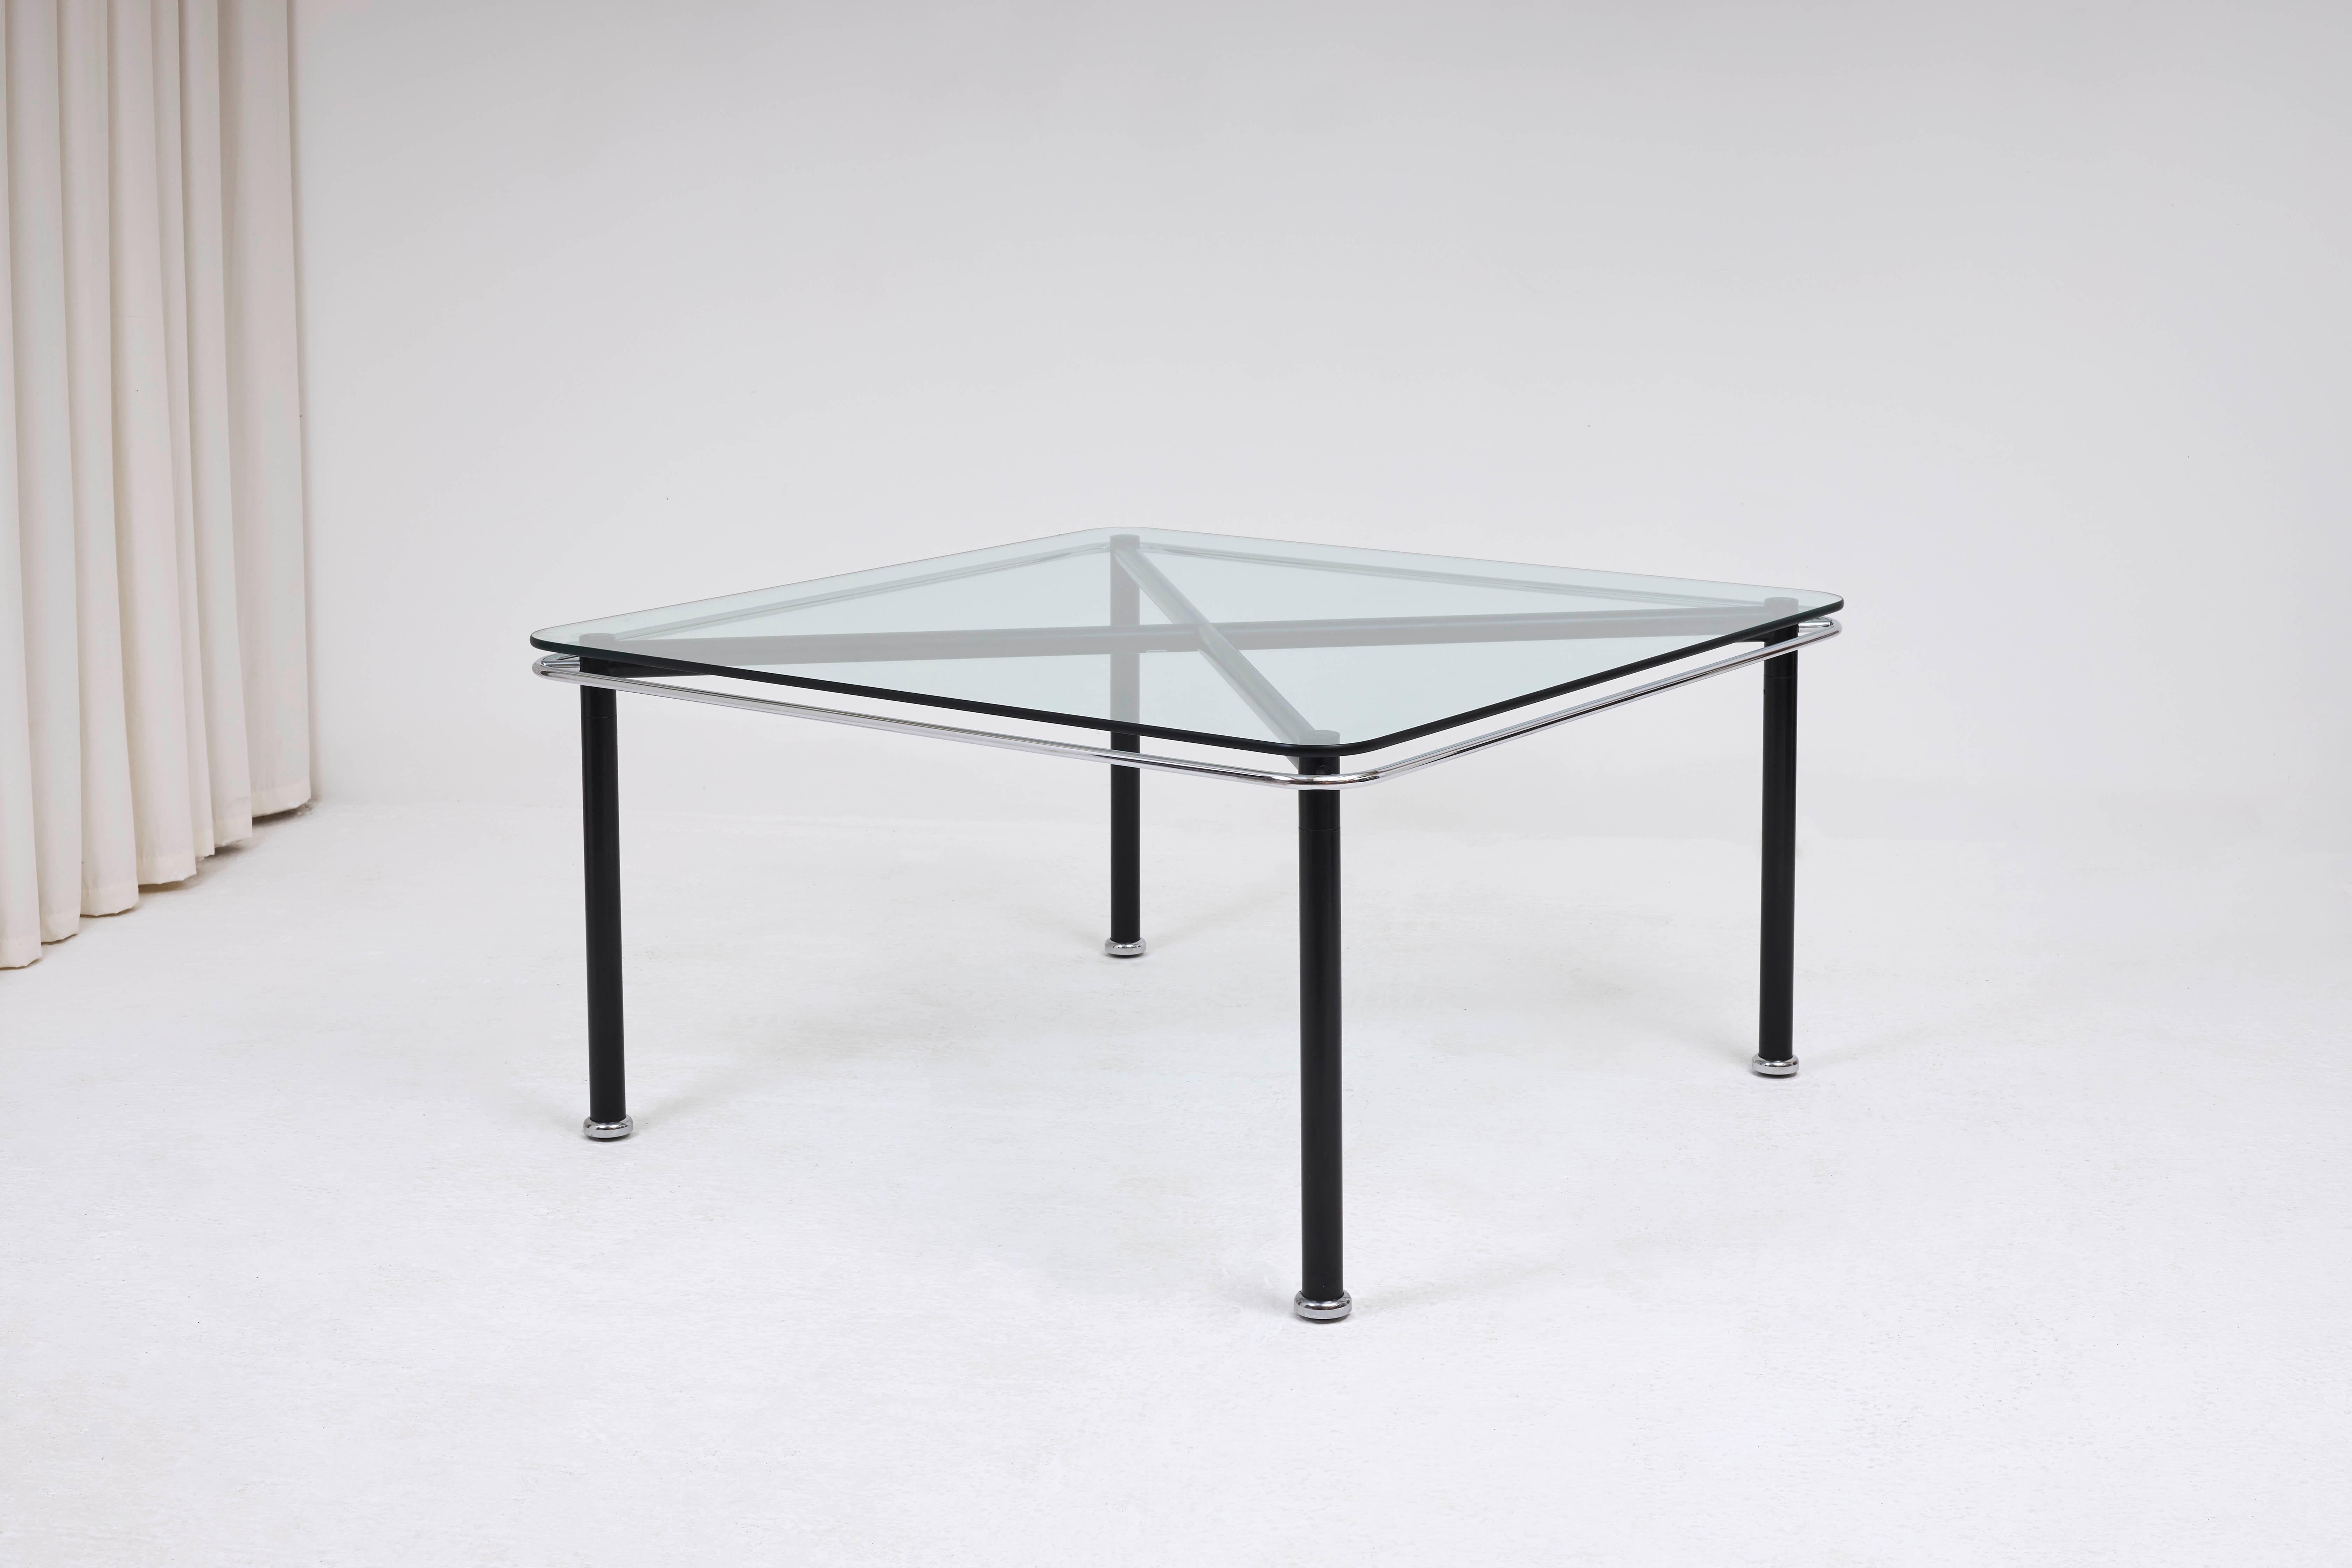 1980's Italian Memphis Dining Table by Sottsass Associati for Bieffeplast For Sale 2